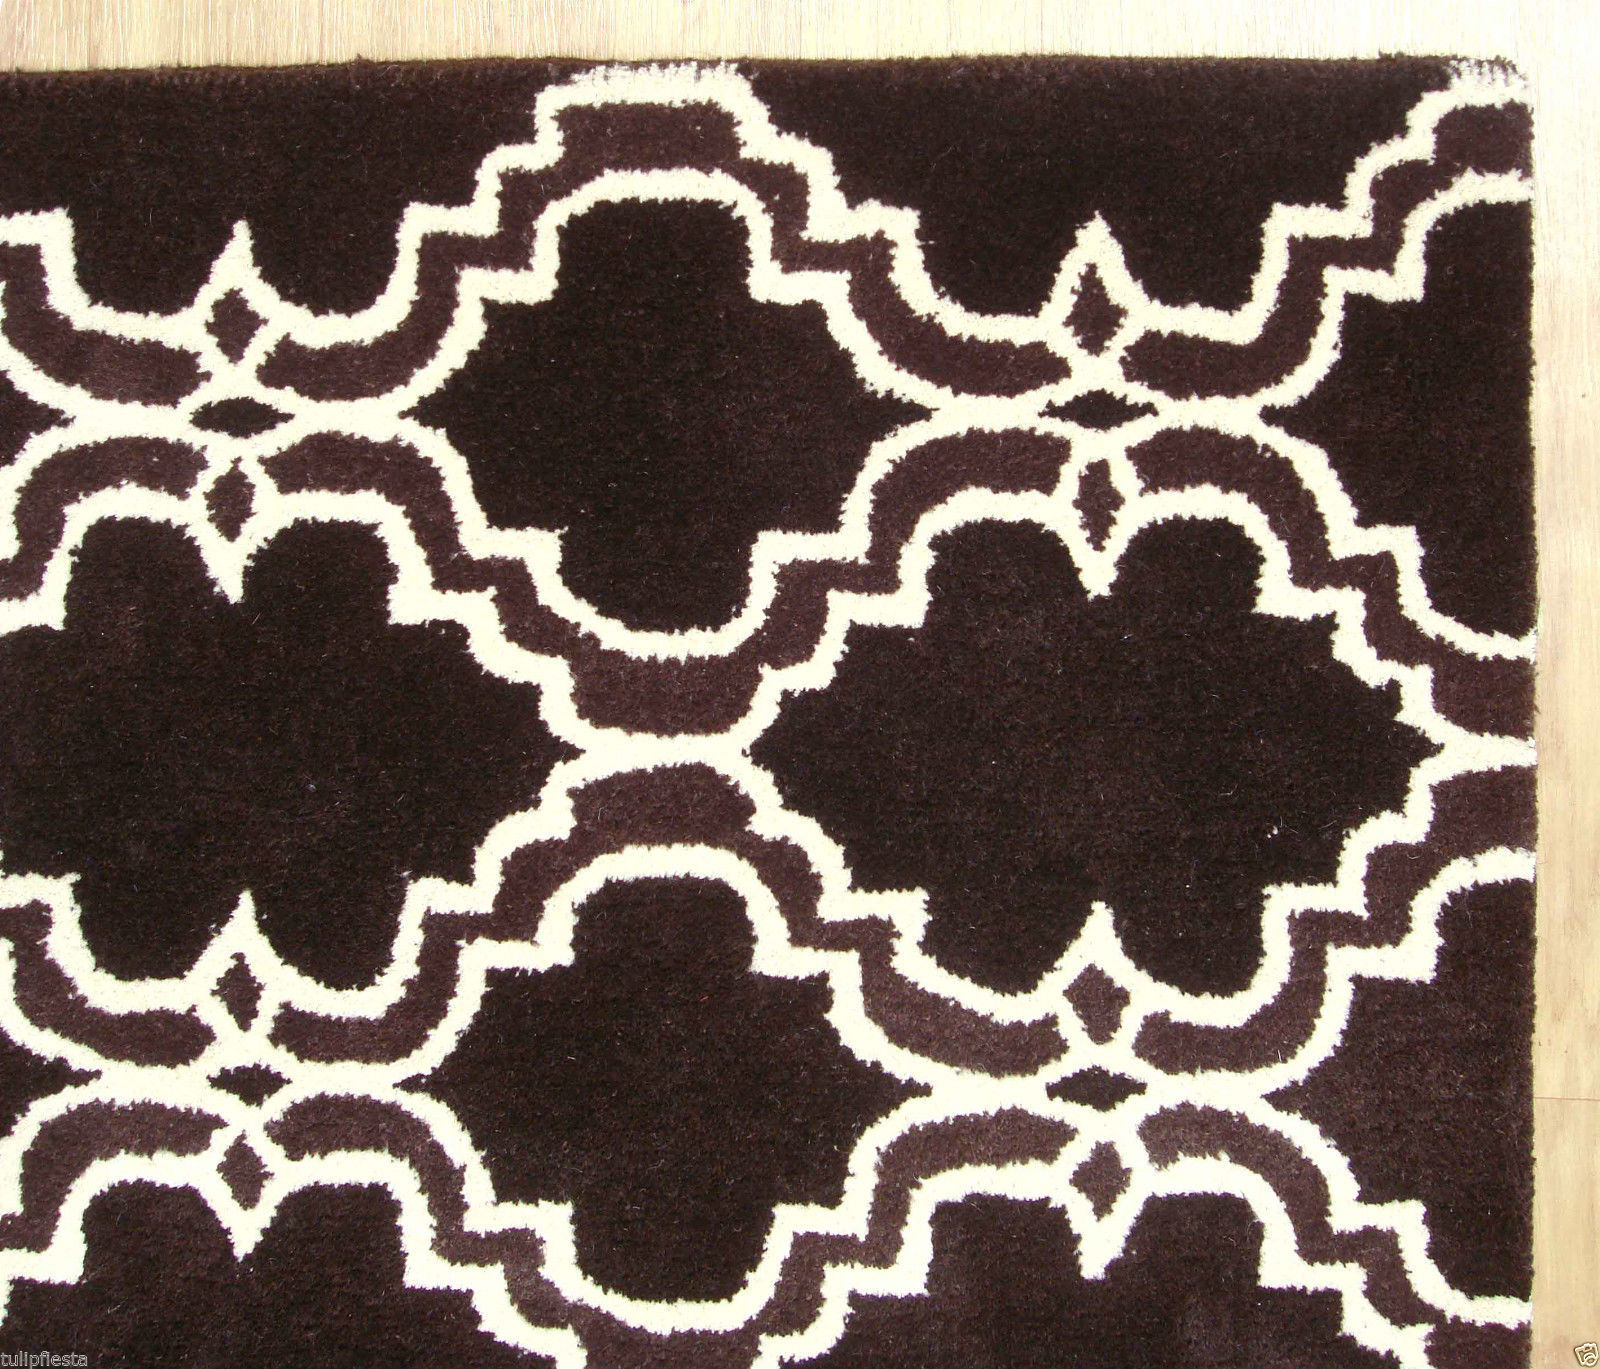 FRENCH ACCENT SCROLL TILE BROWN 8X10 HANDMADE PERSIANSTYLE WOOL AREA RUG - $599.00